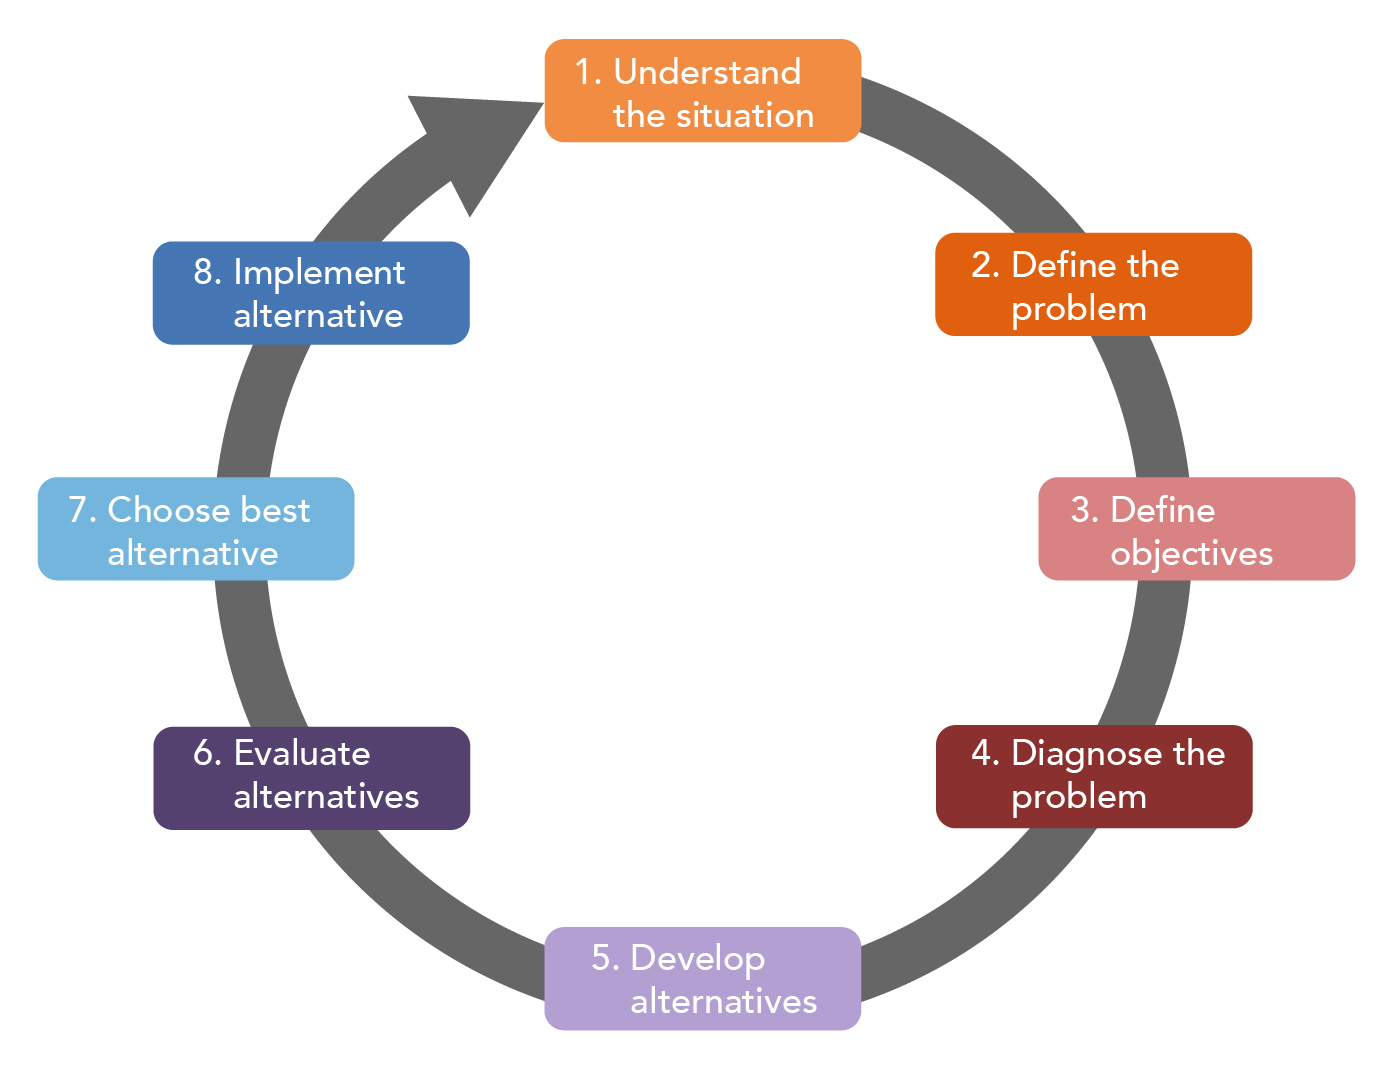 A cycle showing the eight steps in the rational decision making process: 1) Understand the situation. 2) Define problem. 3) Define objectives. 4) Diagnose problem. 5) Develop alternatives. 6) Evaluate alternatives. 7) Choose best alternative. 8) Implement alternative.